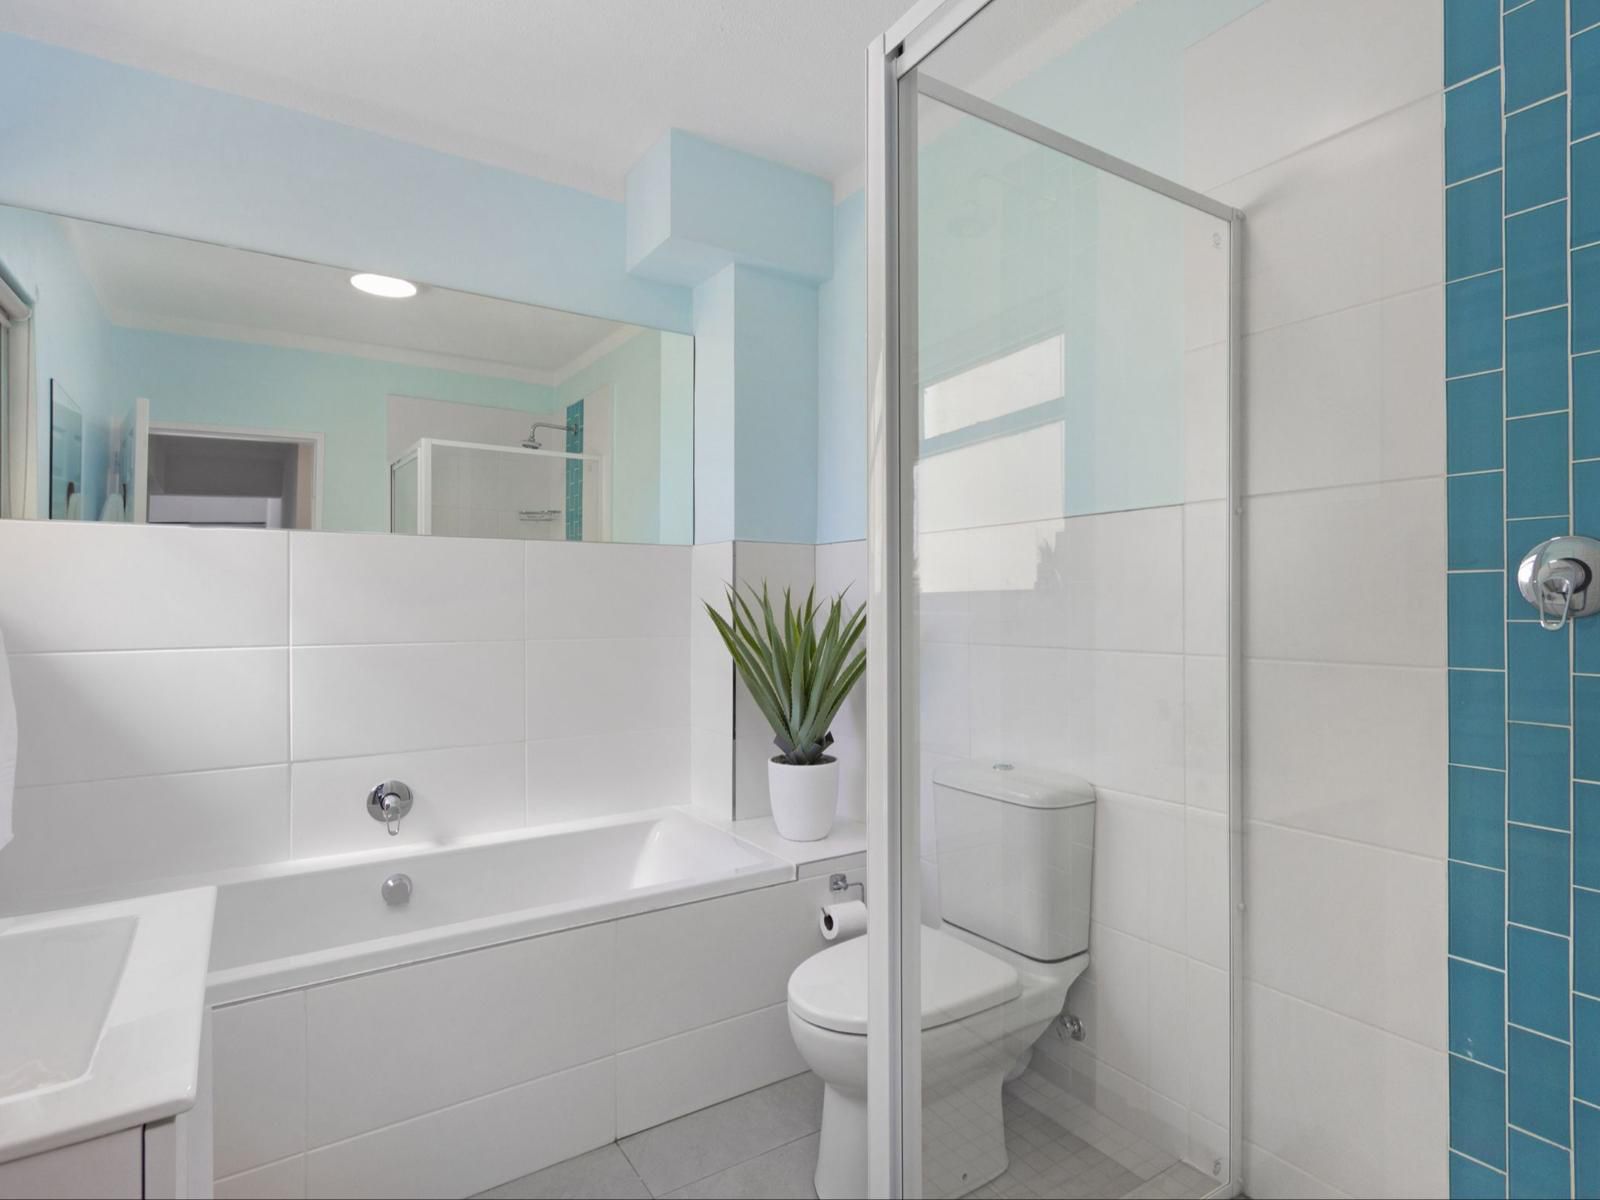 Cisterama 102 By Hostagents Lochnerhof Strand Western Cape South Africa Unsaturated, Bathroom